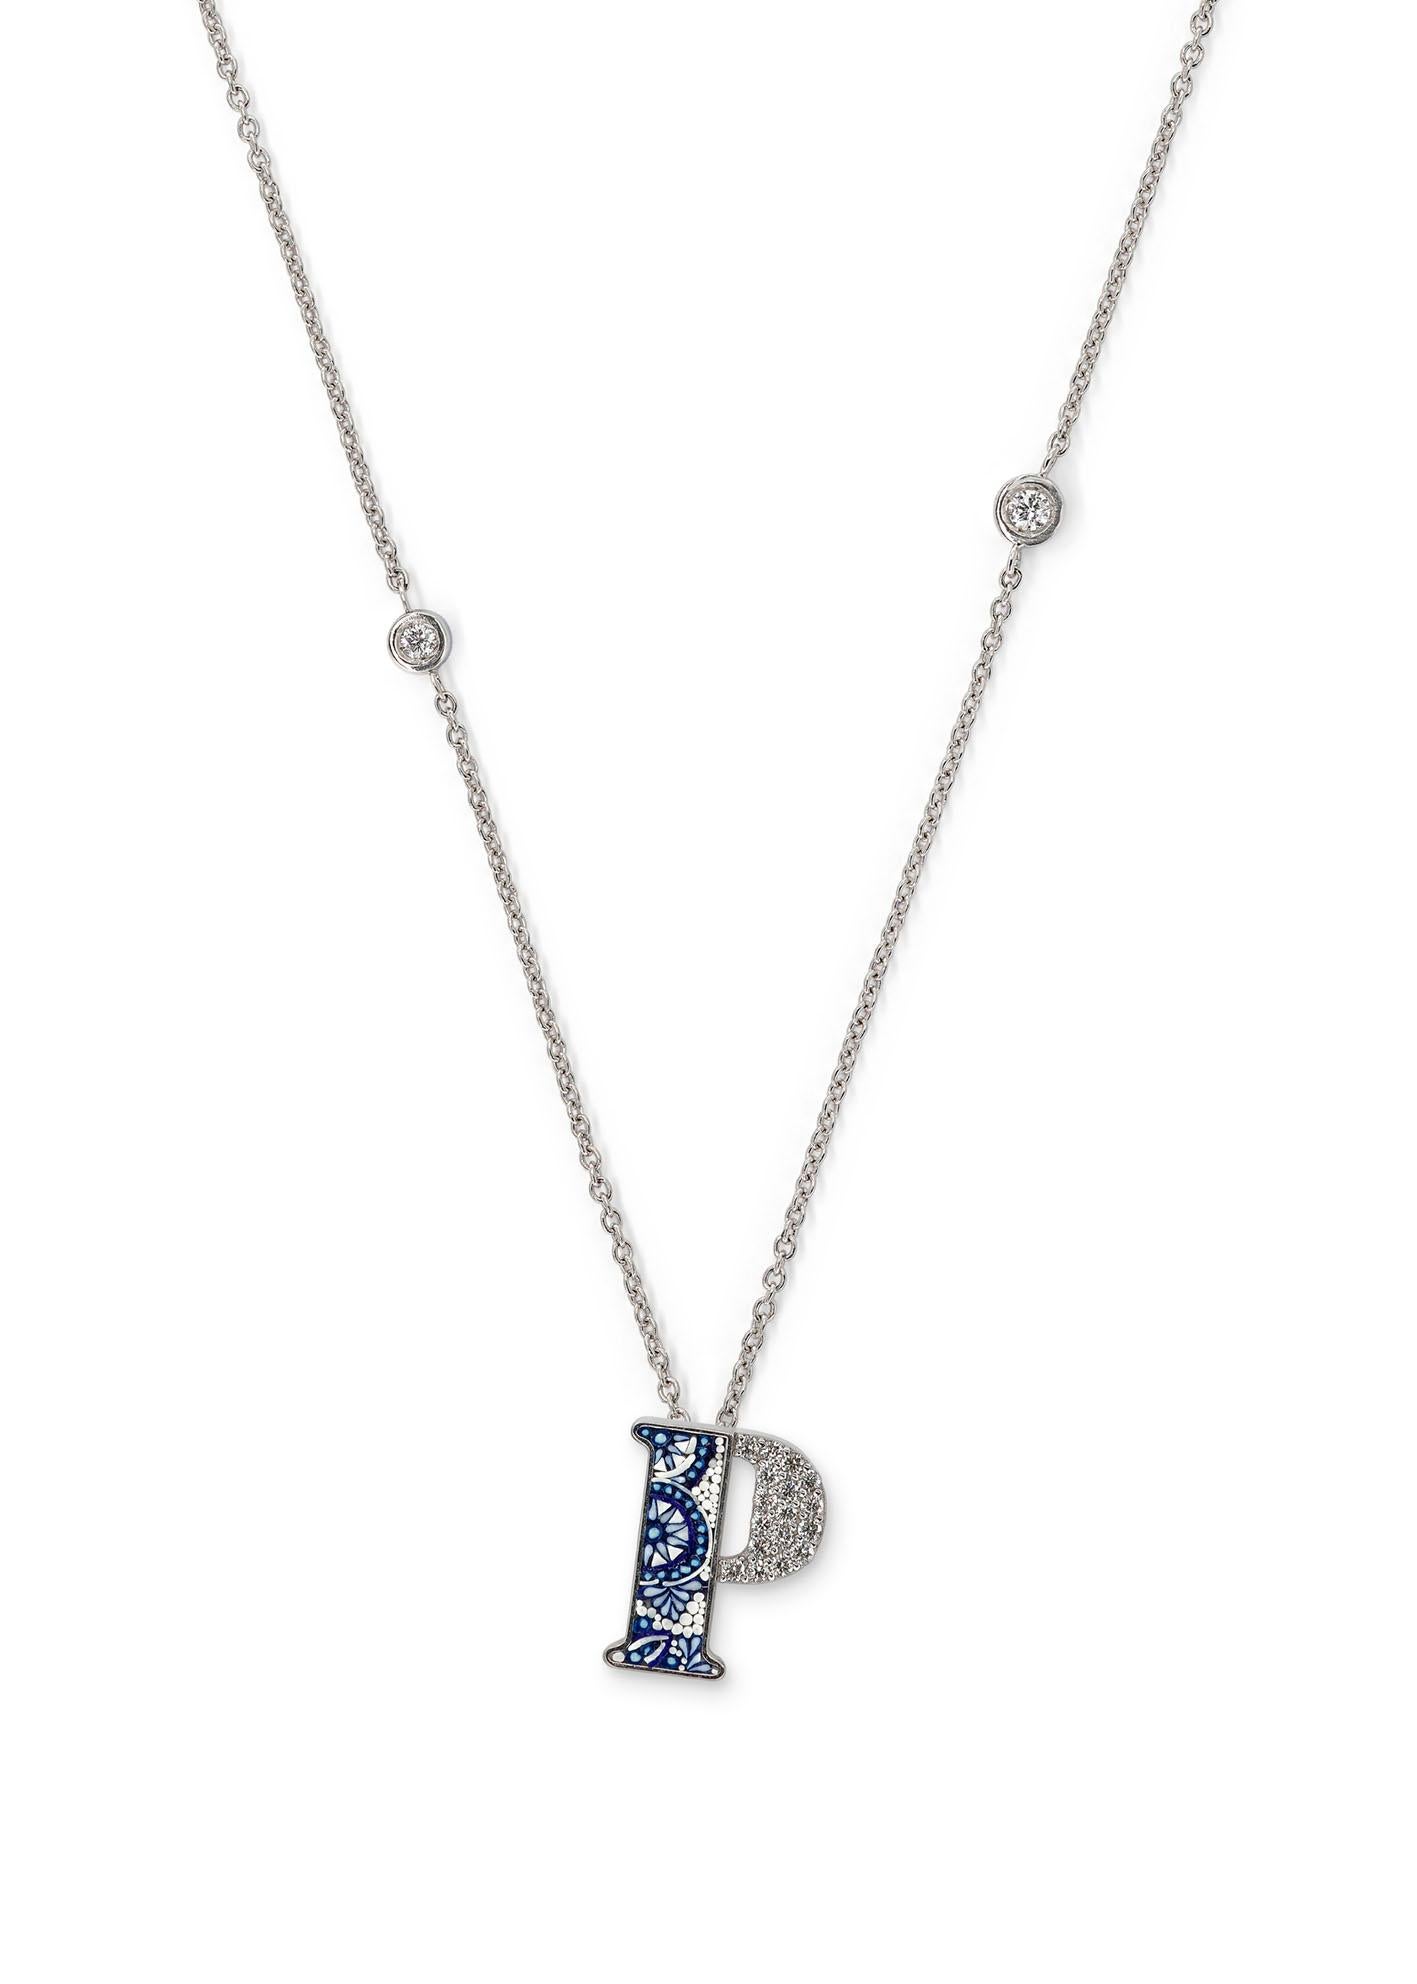 Contemporary Necklace Letter P White Gold White Diamonds Hand Decorated with Micromosaic For Sale